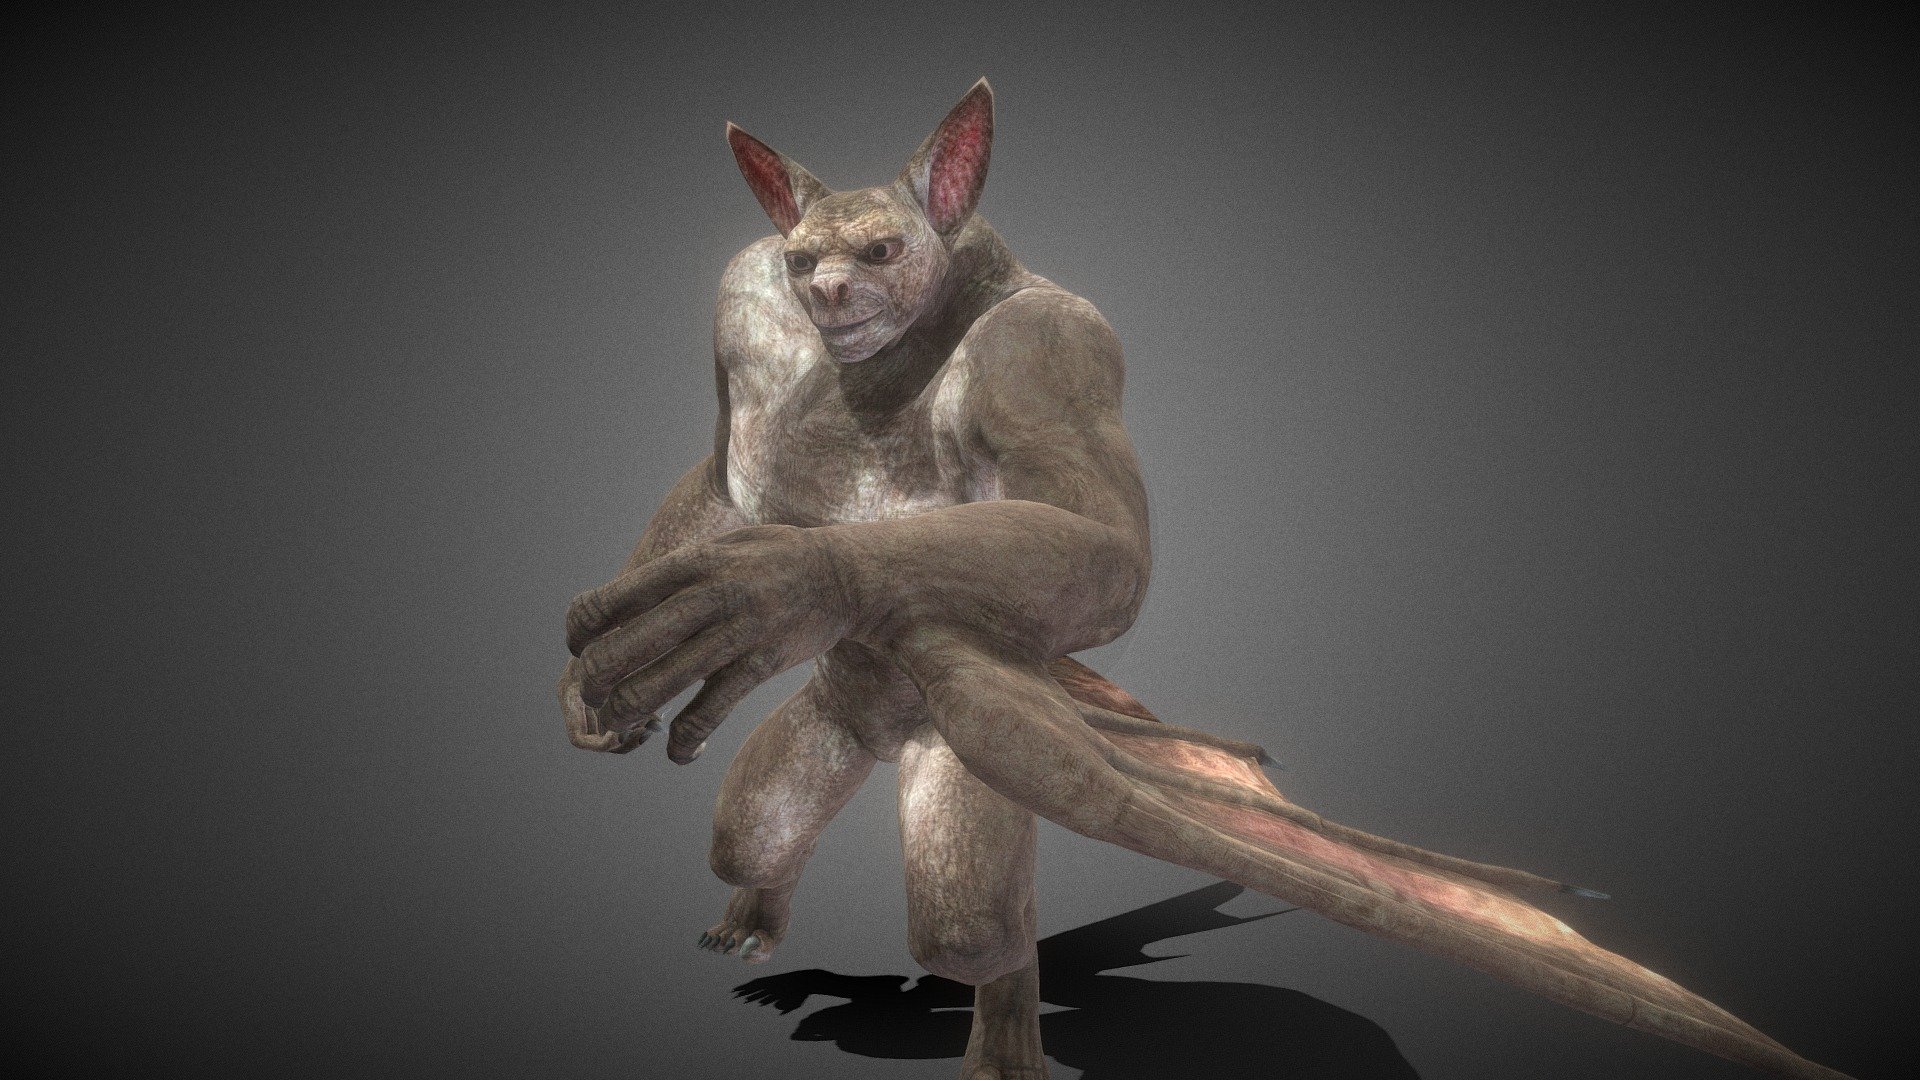 this model cost 5$,
contact me via Email if you wanna buy it:
mr.mahmoud.haniya.1991@hotmail.com - High-detailed Bat Beast full-Rigged and animated - 3D model by Mahmoud.Moh 3d model